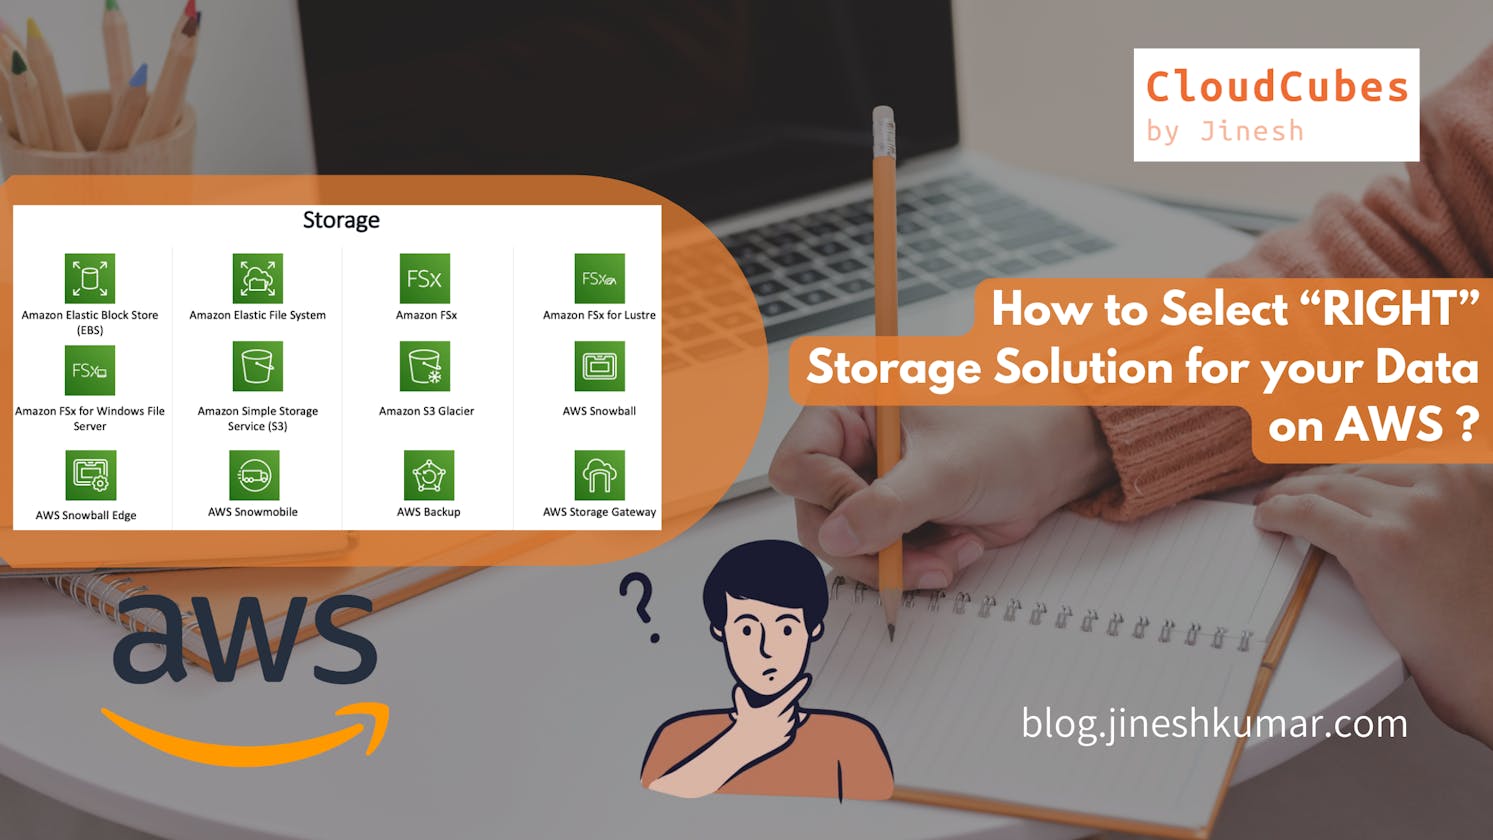 Selecting the "Right" Storage Solution on AWS